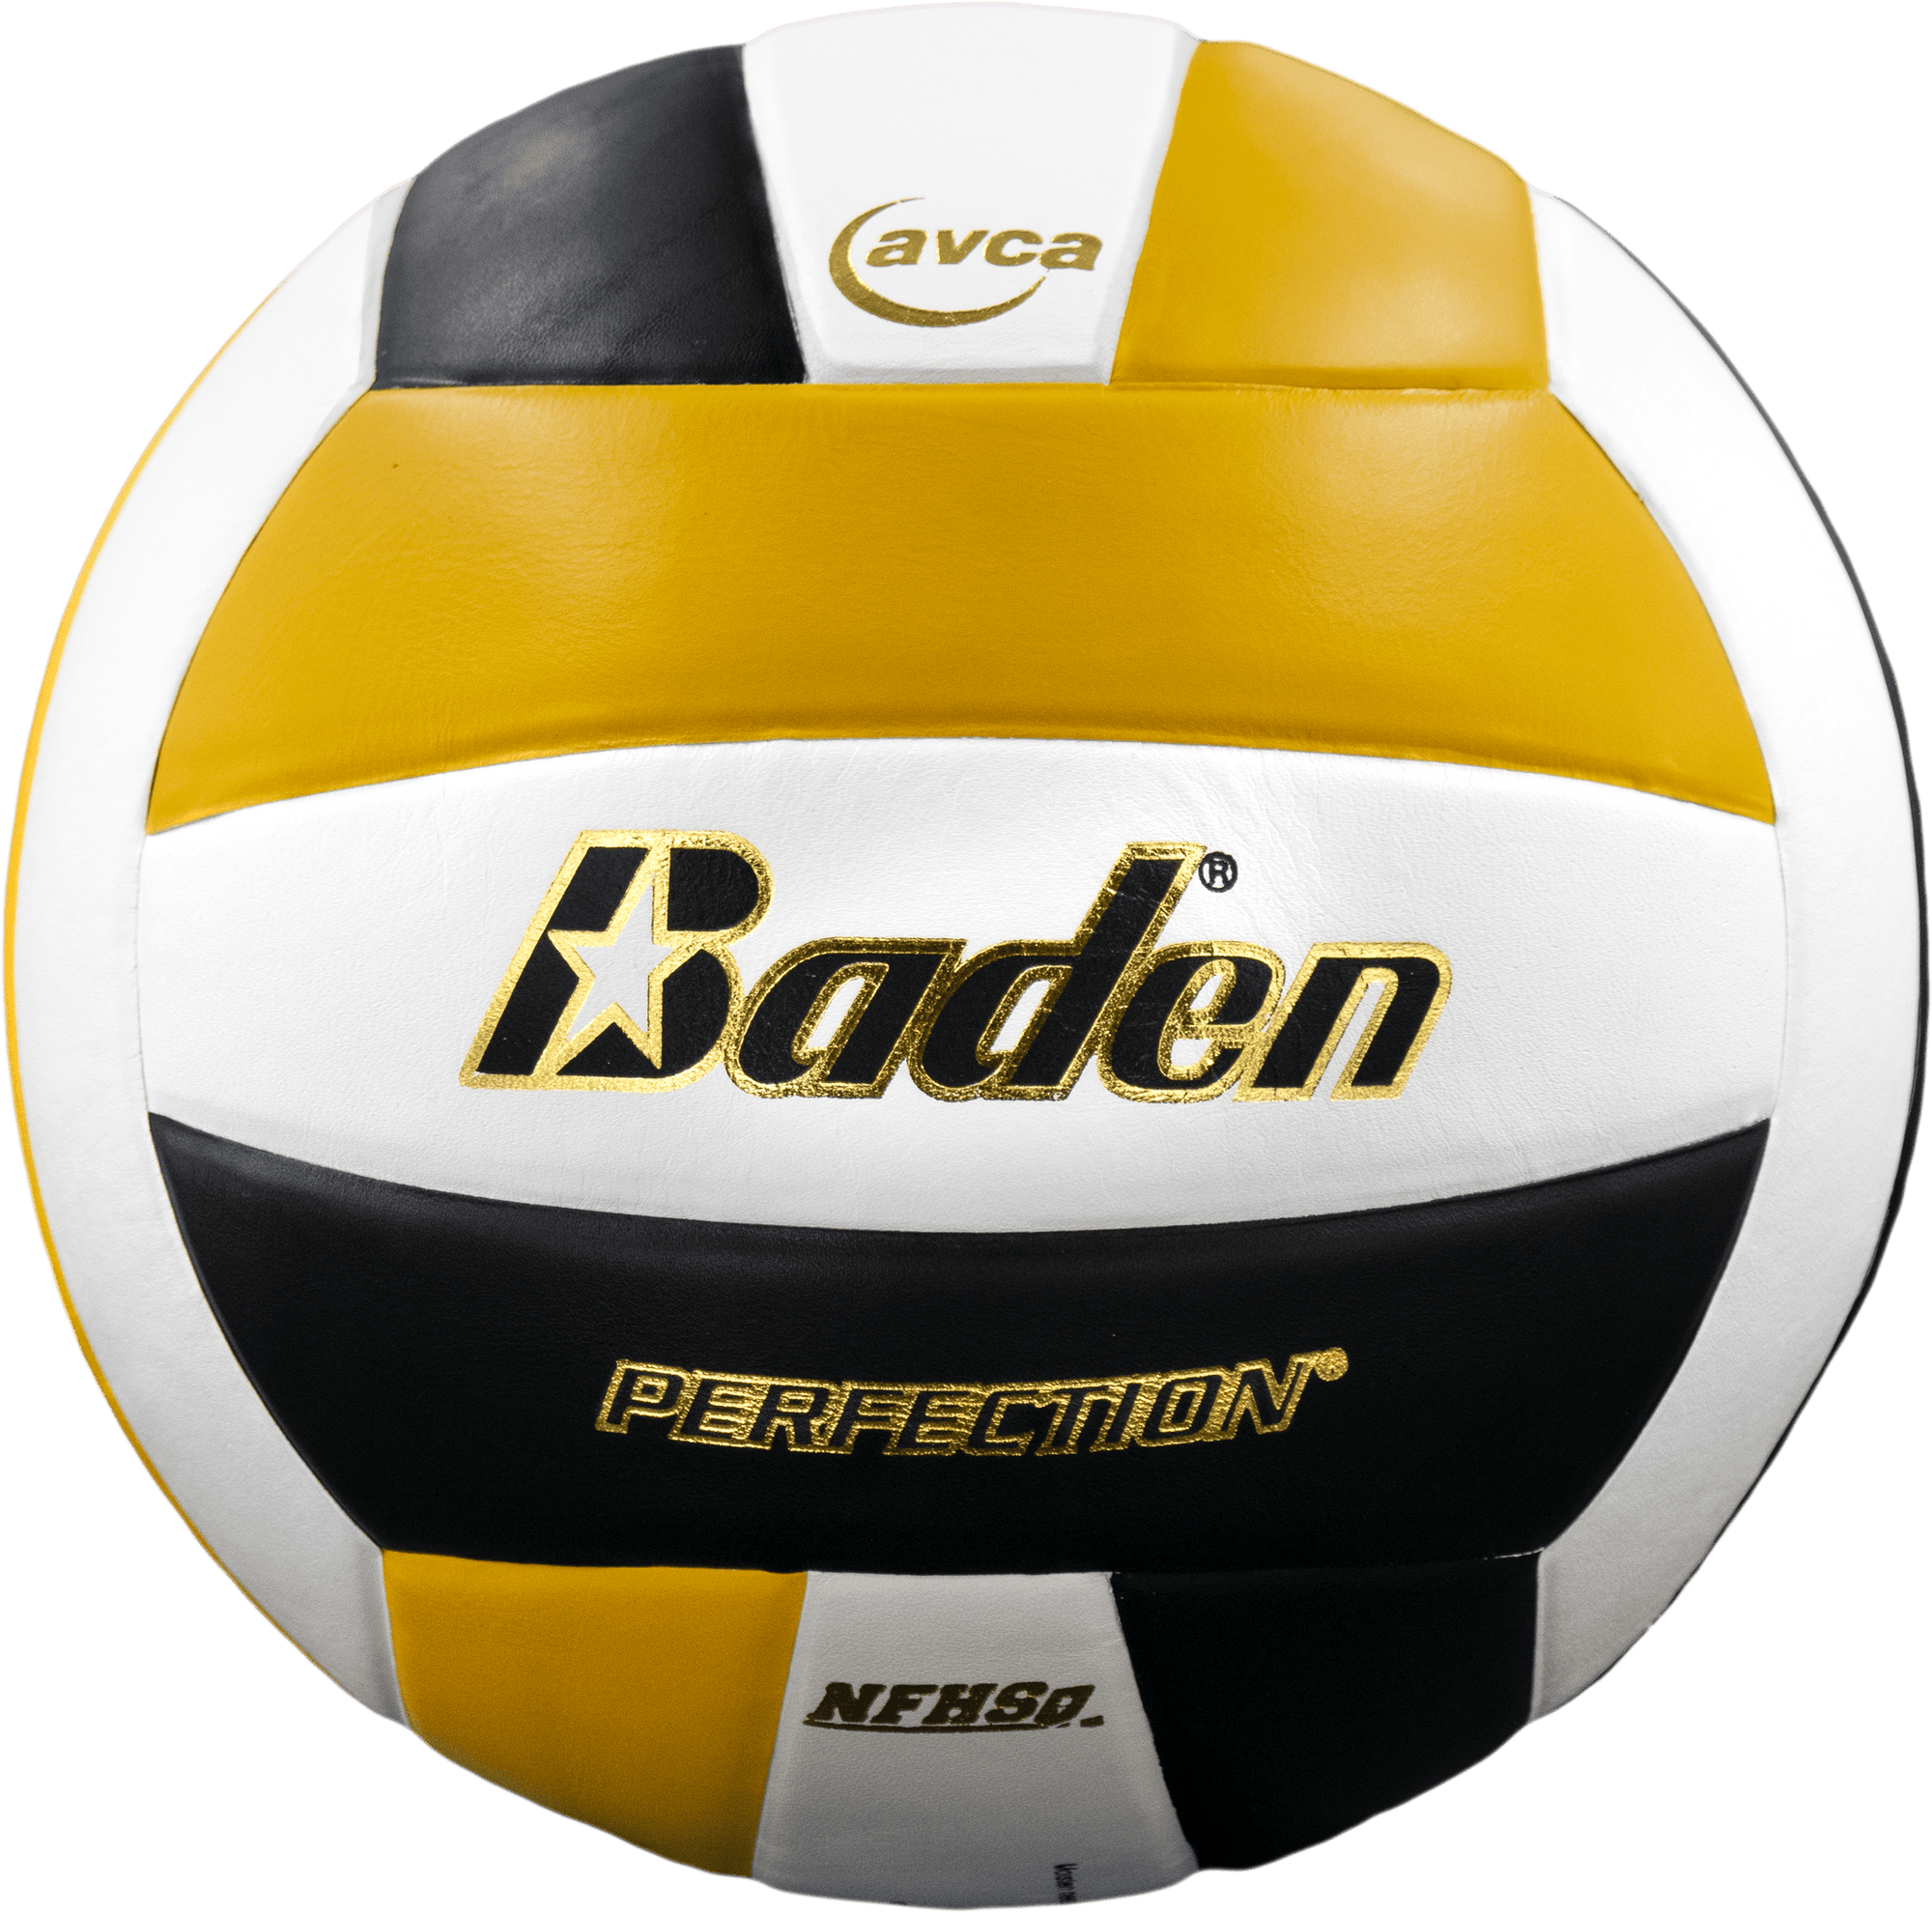 Perfection Leather Sports Baden Volleyball -